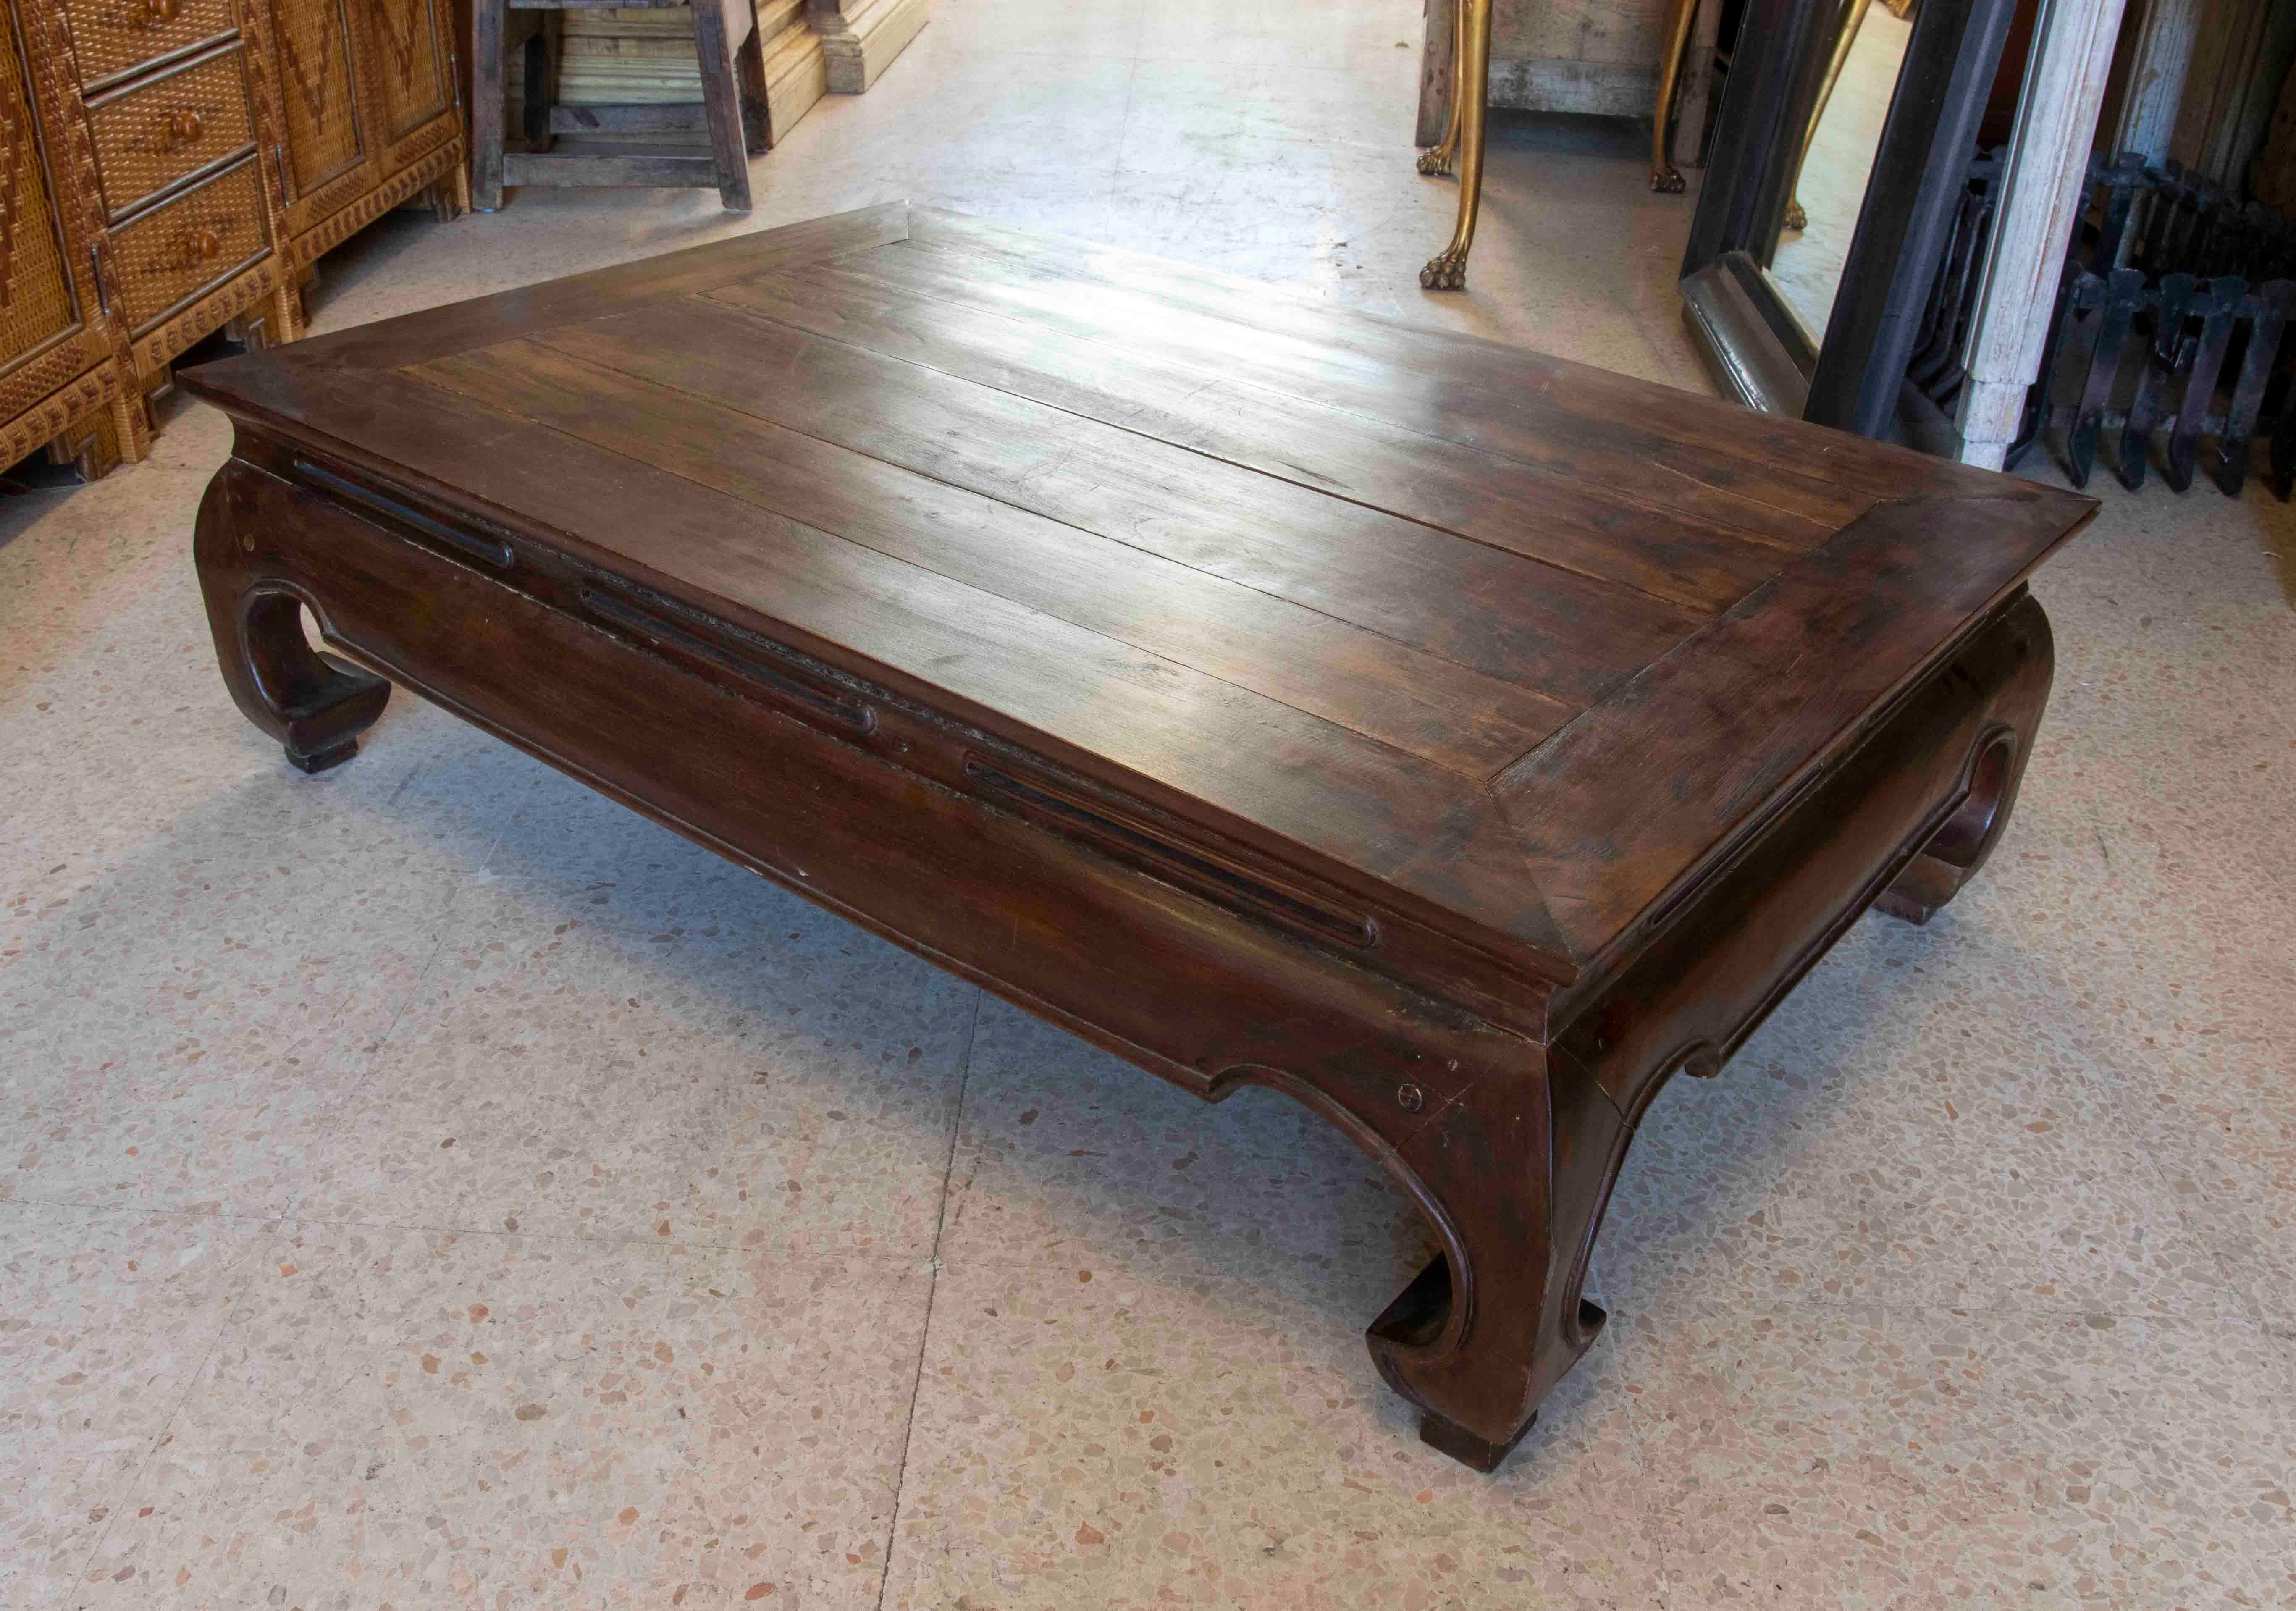 17th Century Asian Wooden Coffee Table with Turtle-Shaped Legs For Sale